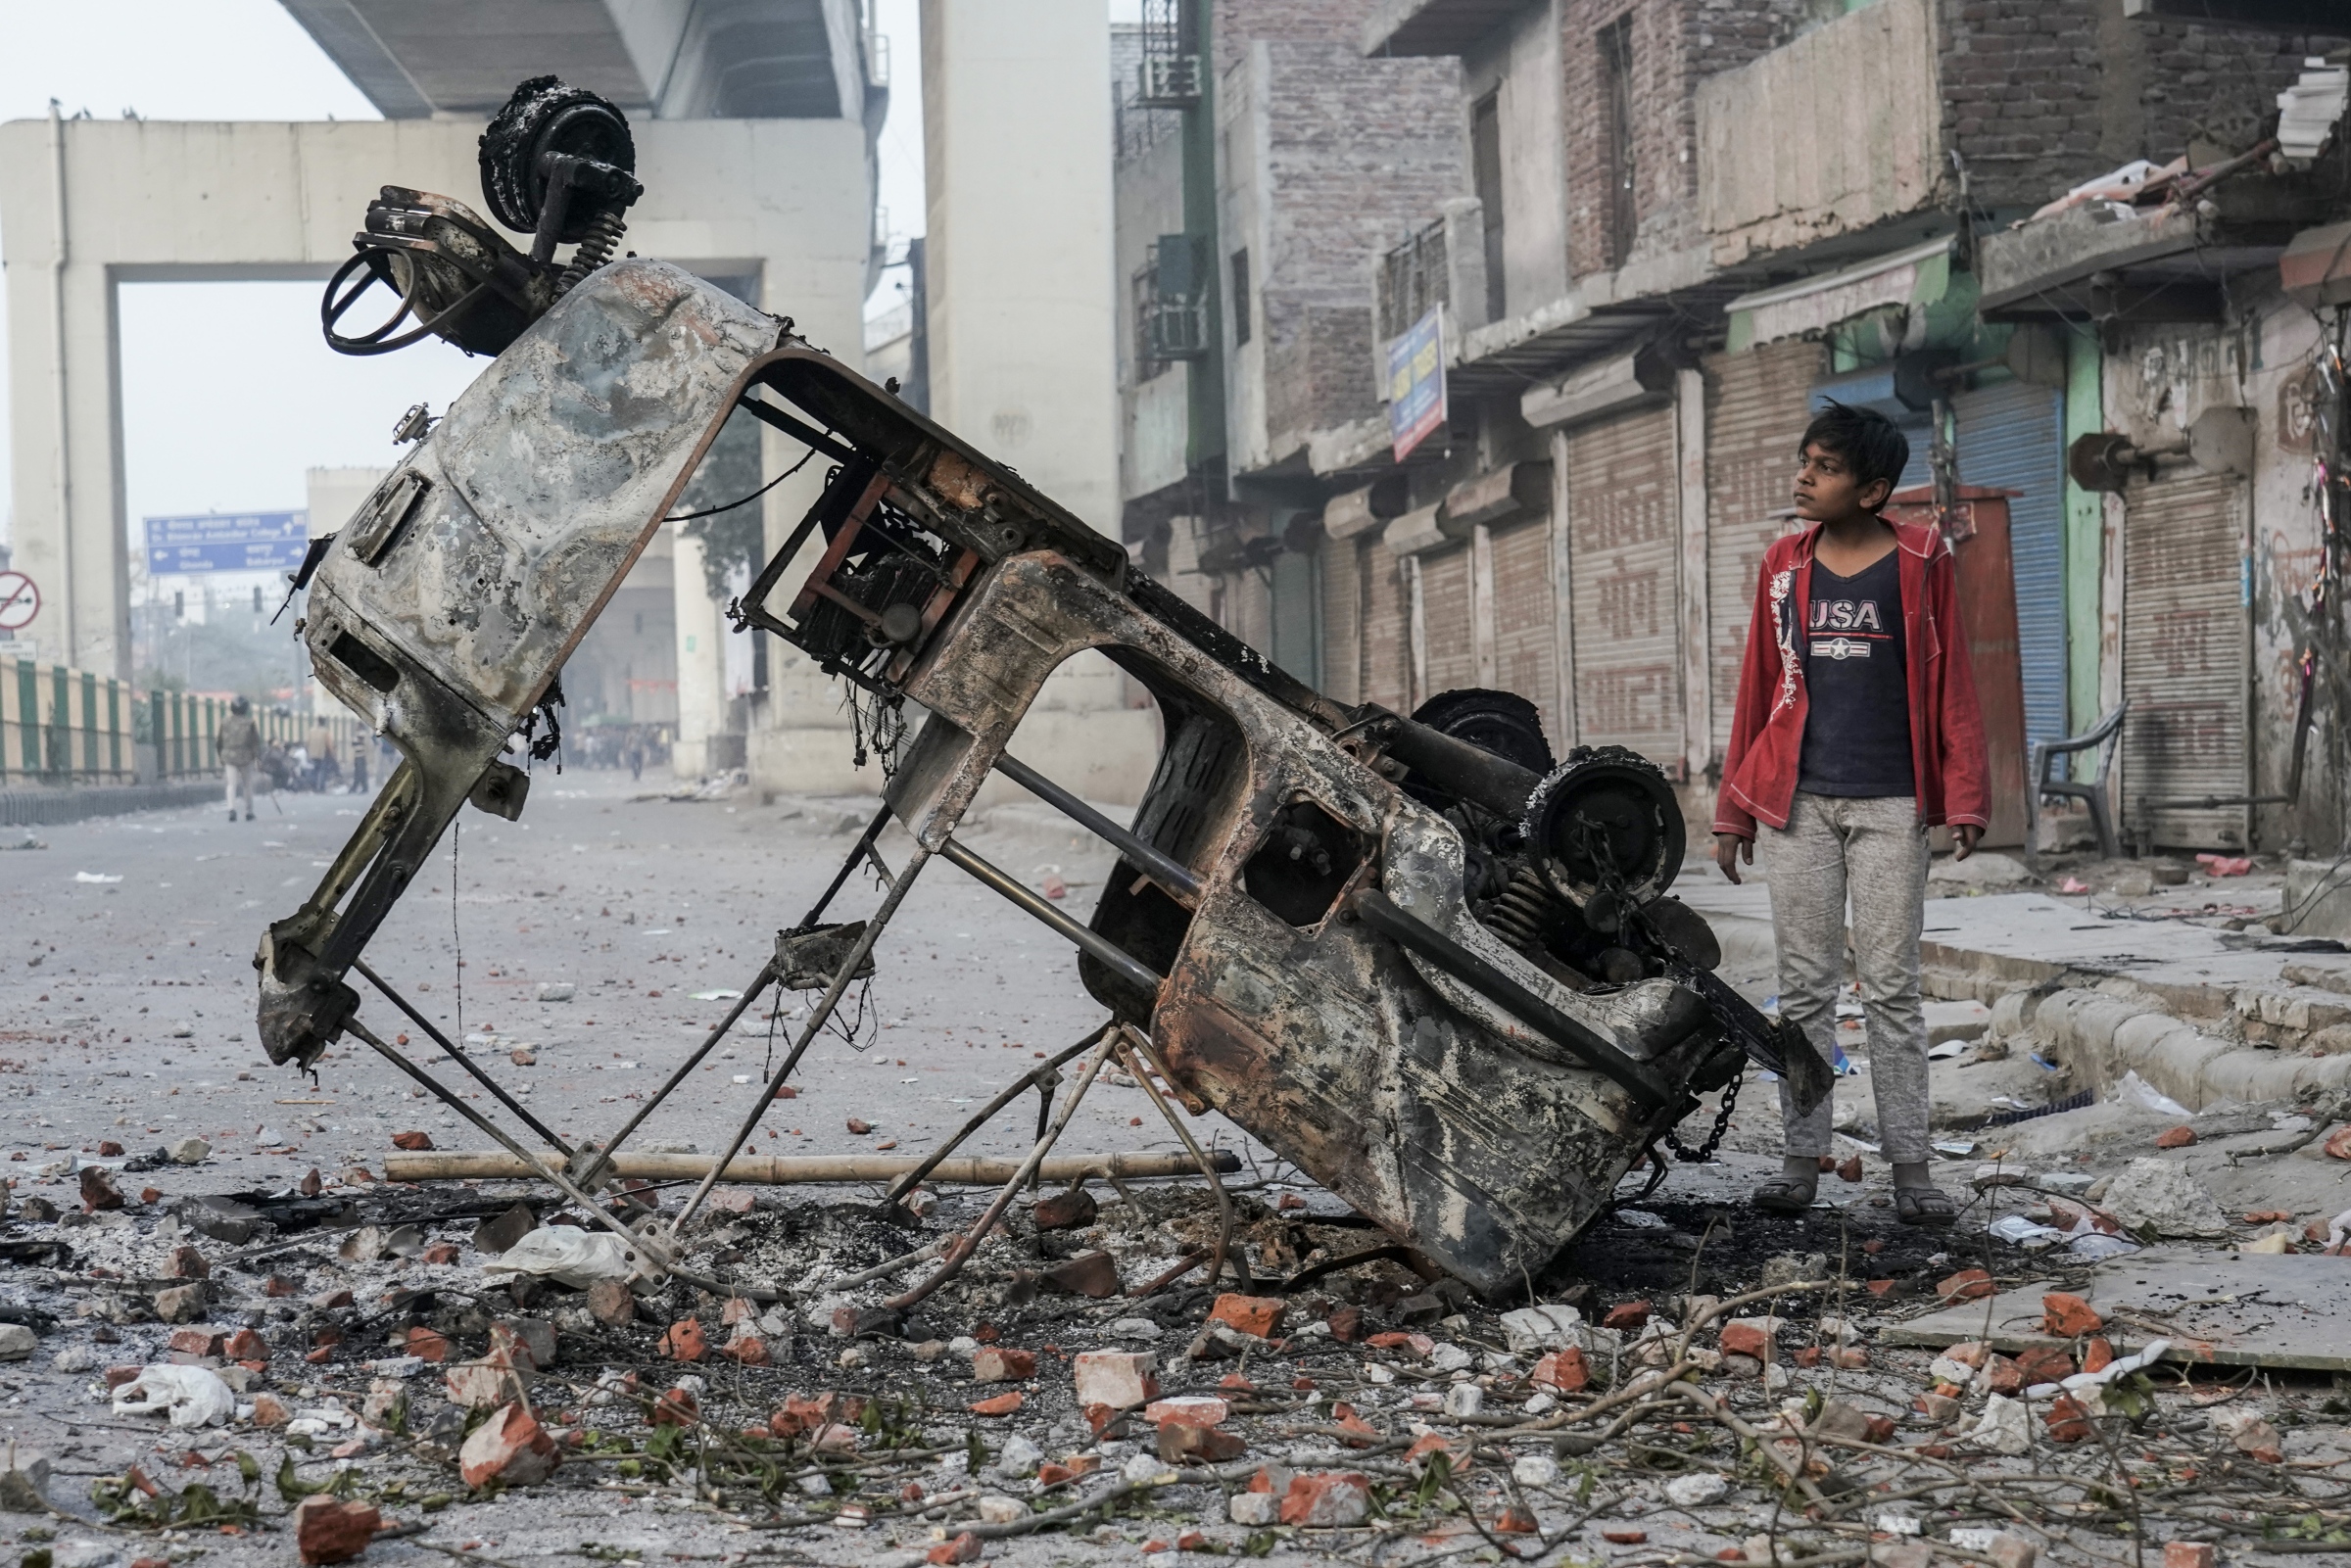  Home - A boy observes an upended vehicle that was charred during the Northeast Delhi riots on Feb. 24, 2020, in Maujpur, Delhi, India. Sectarian division reached its precipice as violence broke out in and around the capital between Hindu nationalists and those in opposition to Prime Minister Modi's Citizen Amendment Act. 